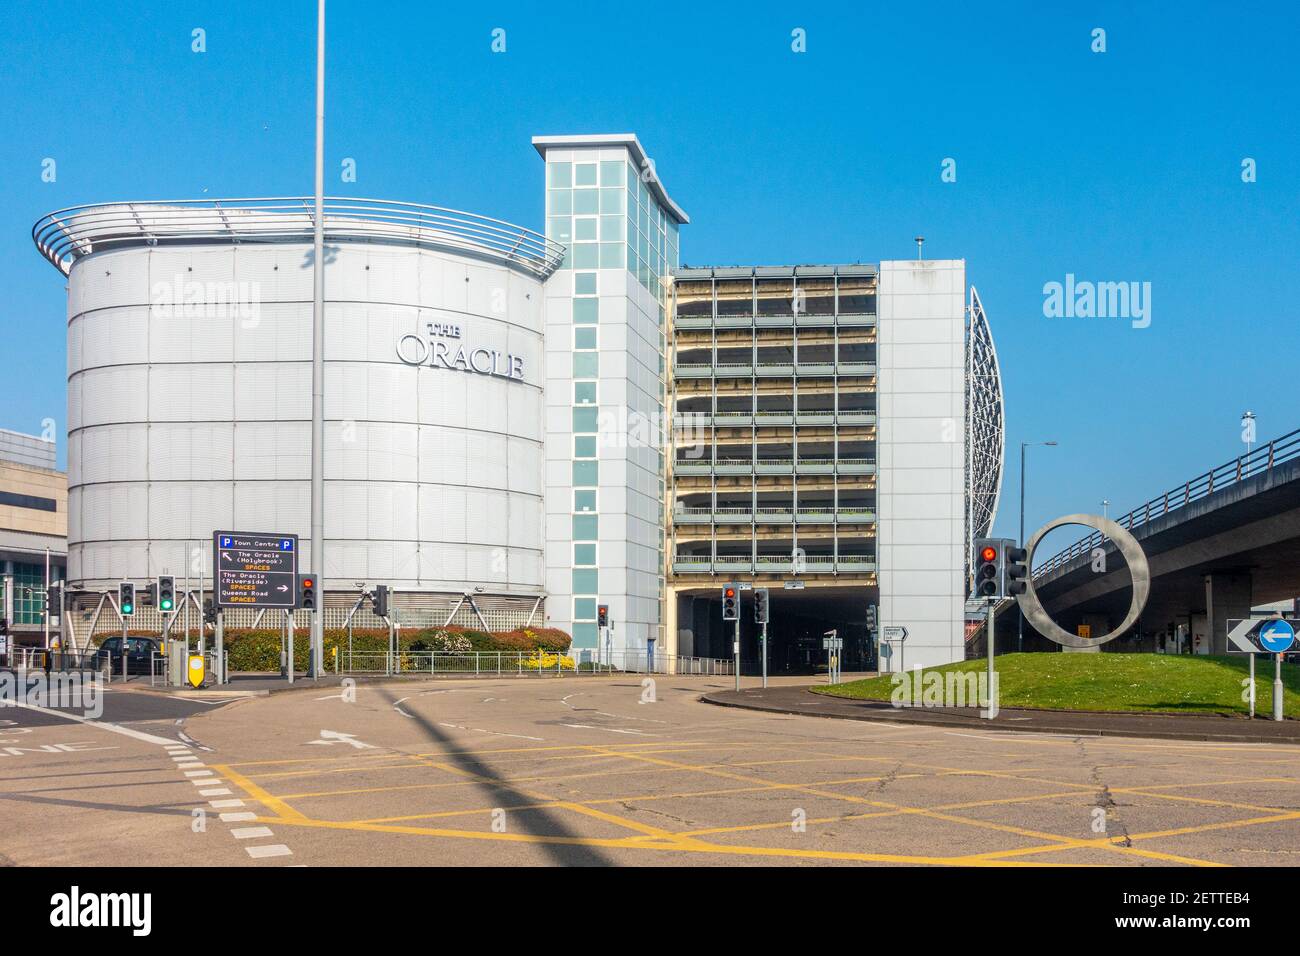 The Oracle shopping centre and multi-storey car park in Reading, UK. Stock Photo